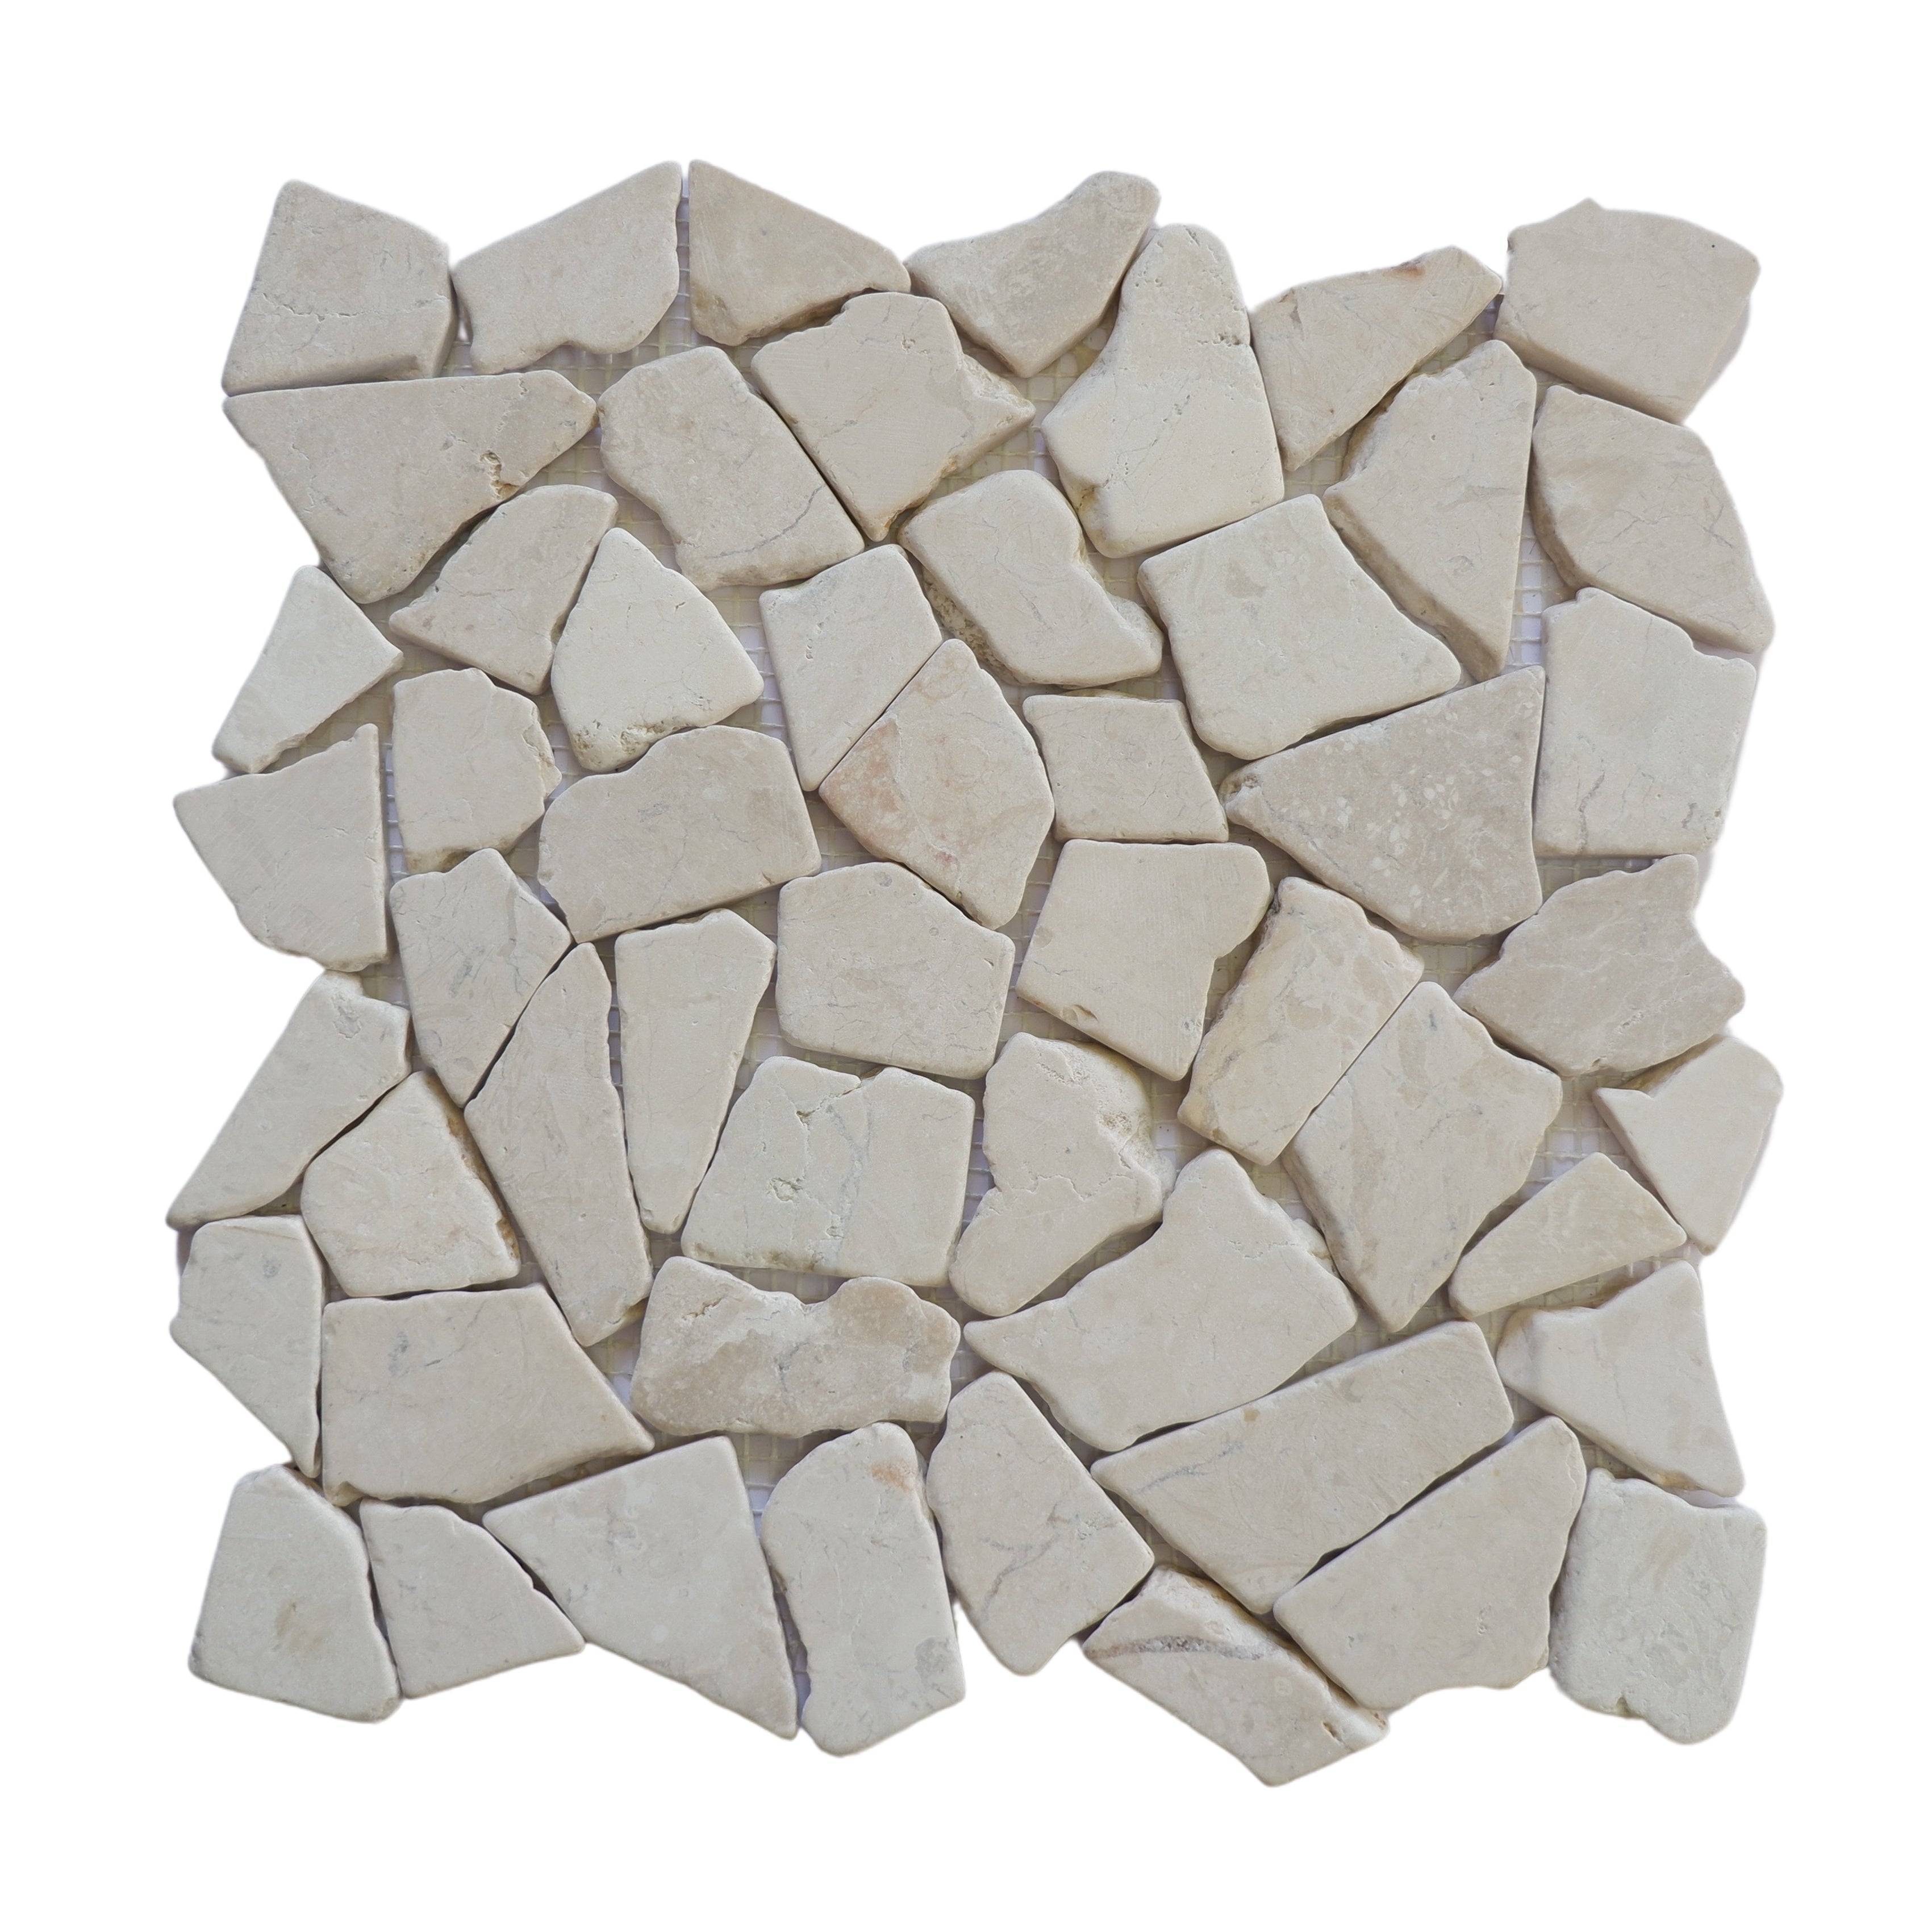 Alpen white random tile sample without grout